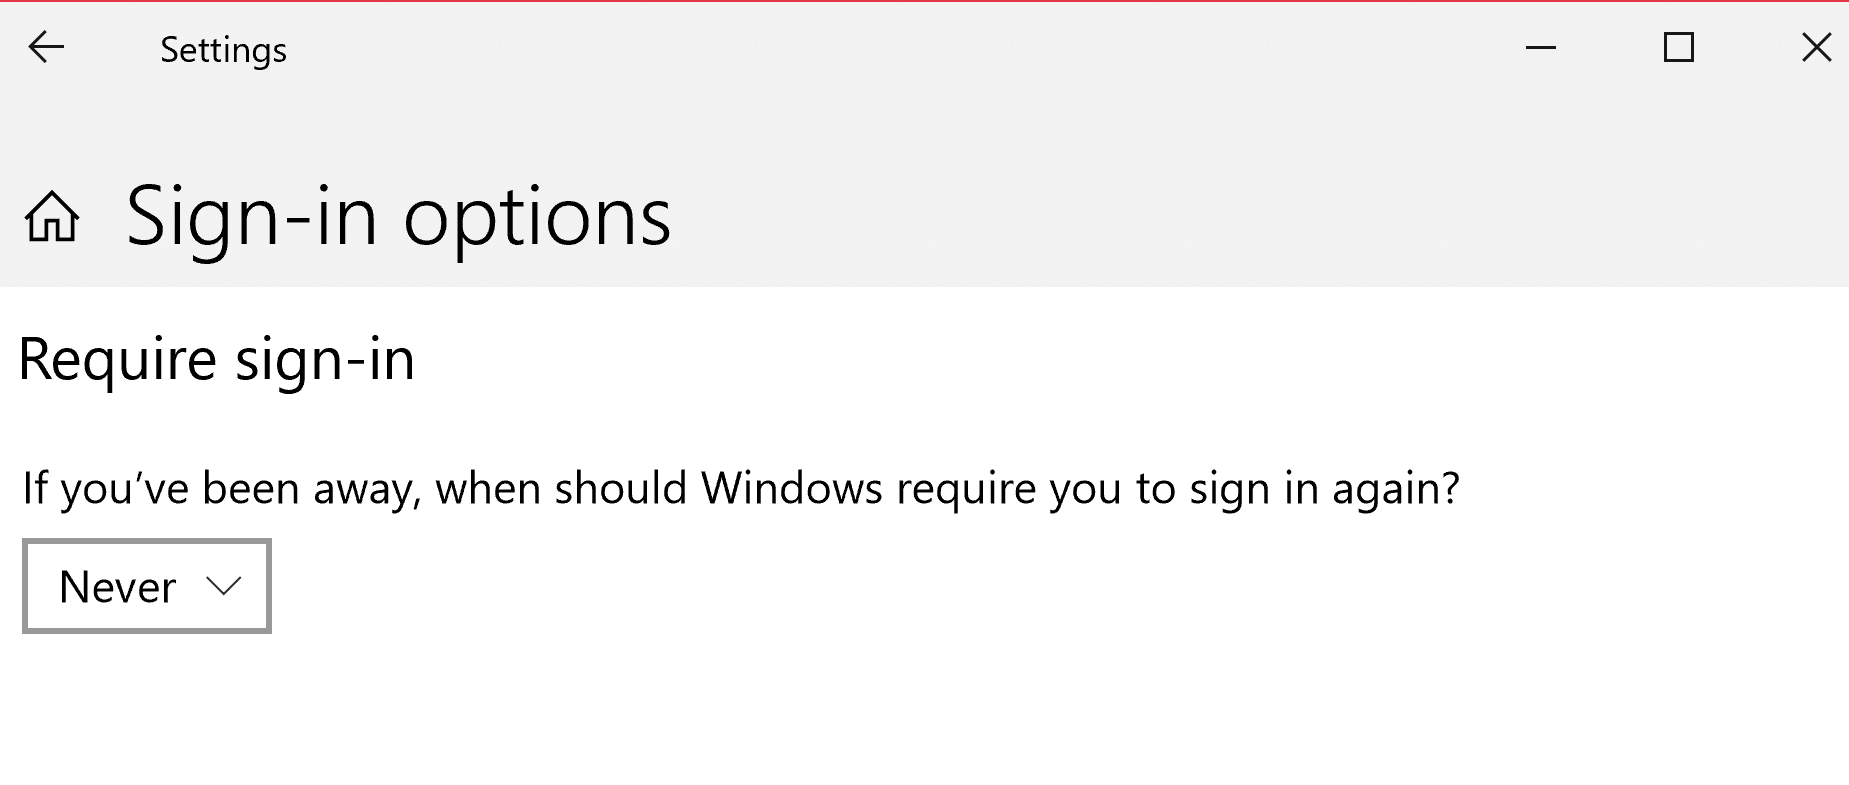 Sign-In Settings b7f6eff4-64ac-443d-a79d-2e92191f98e8?upload=true.png